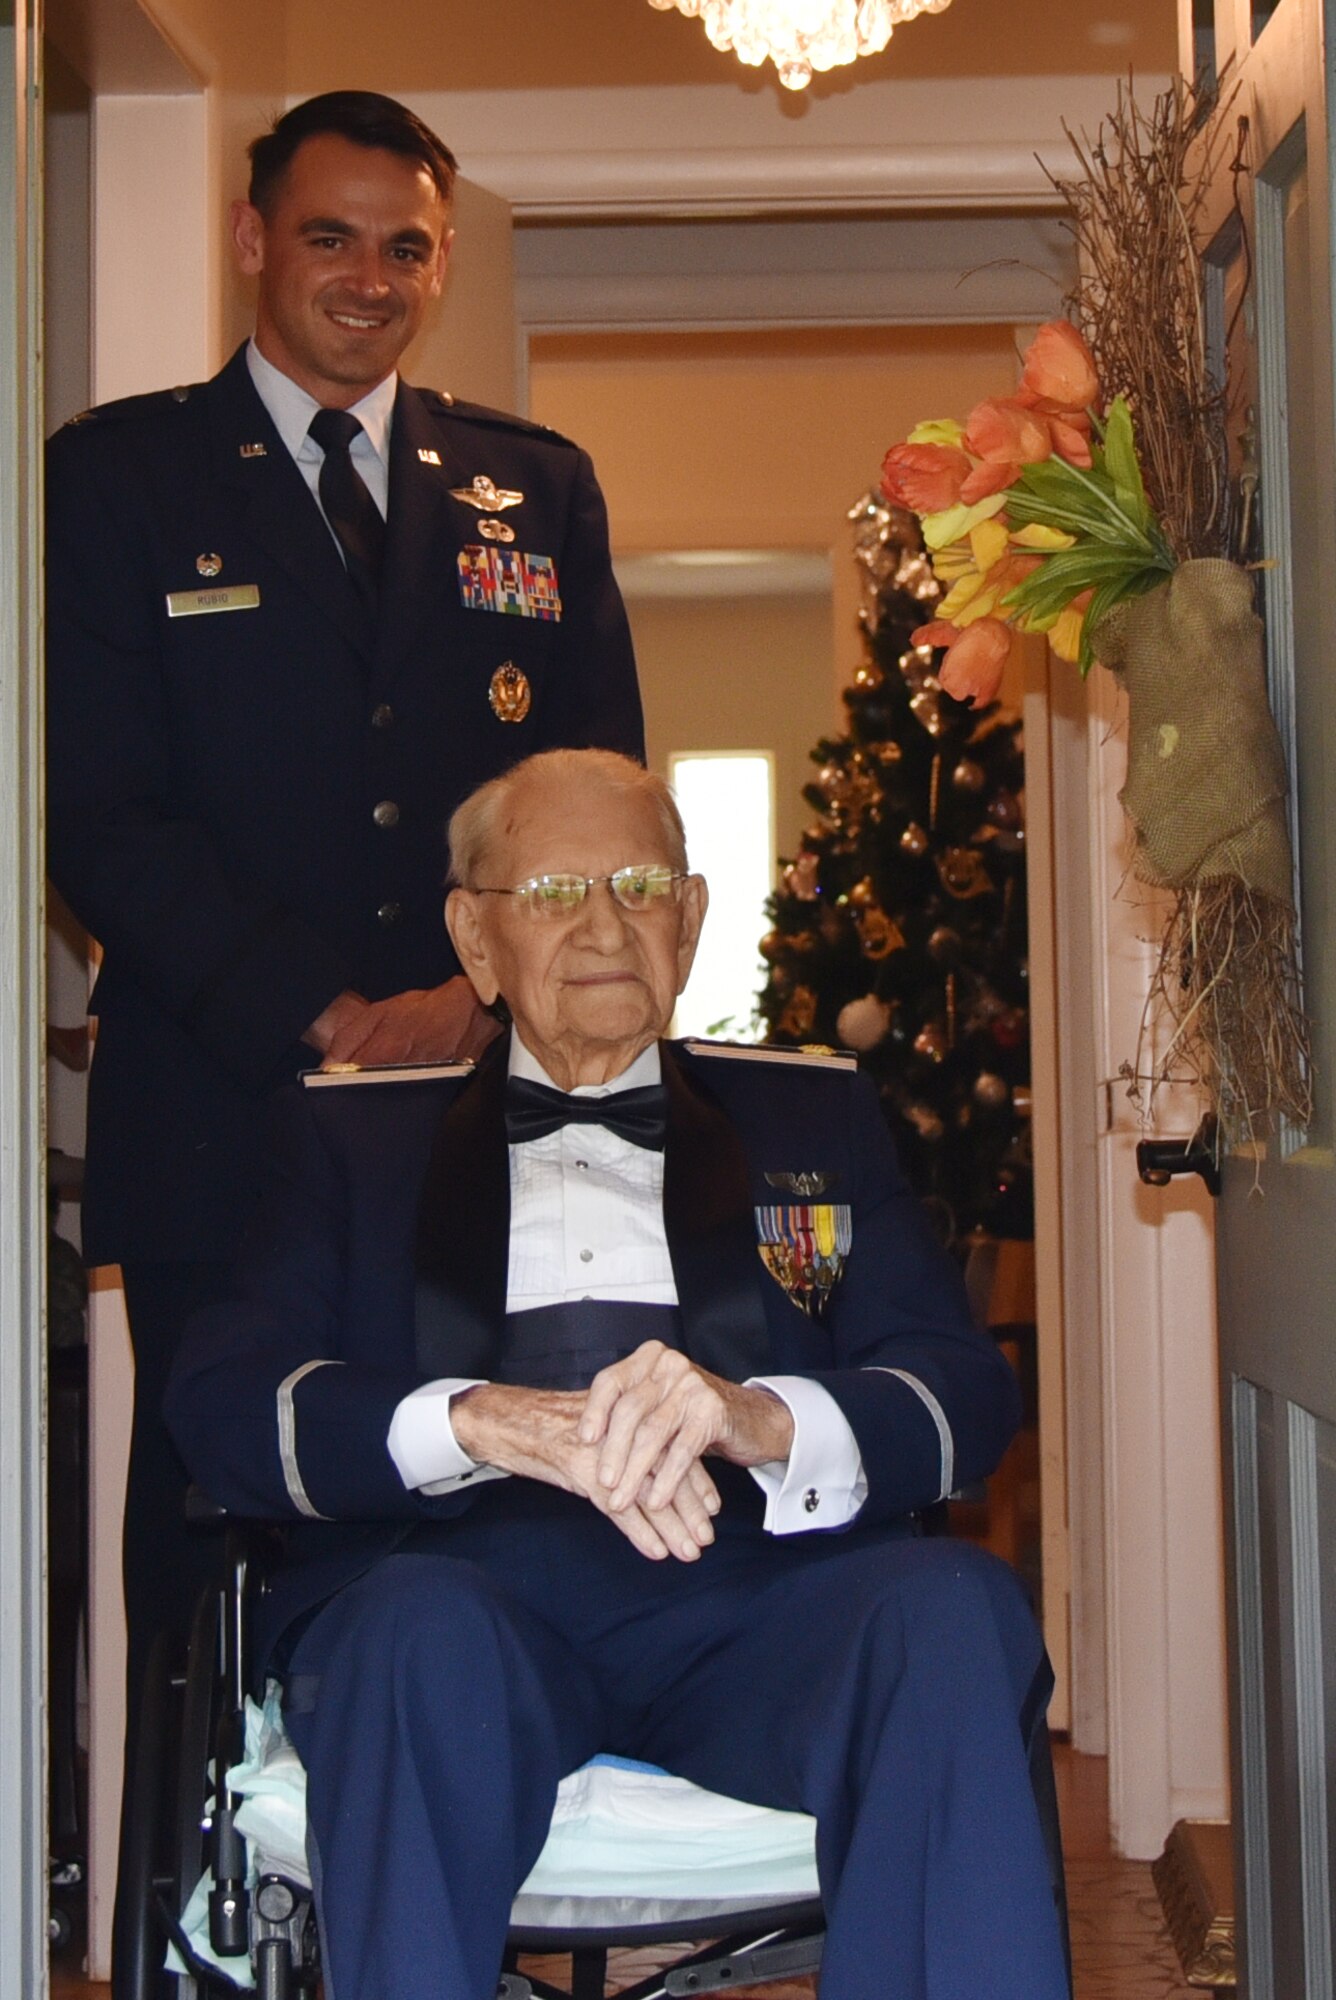 Col. Rubio stands behind Maj. Thomas, in a wheelchair, in a doorway.